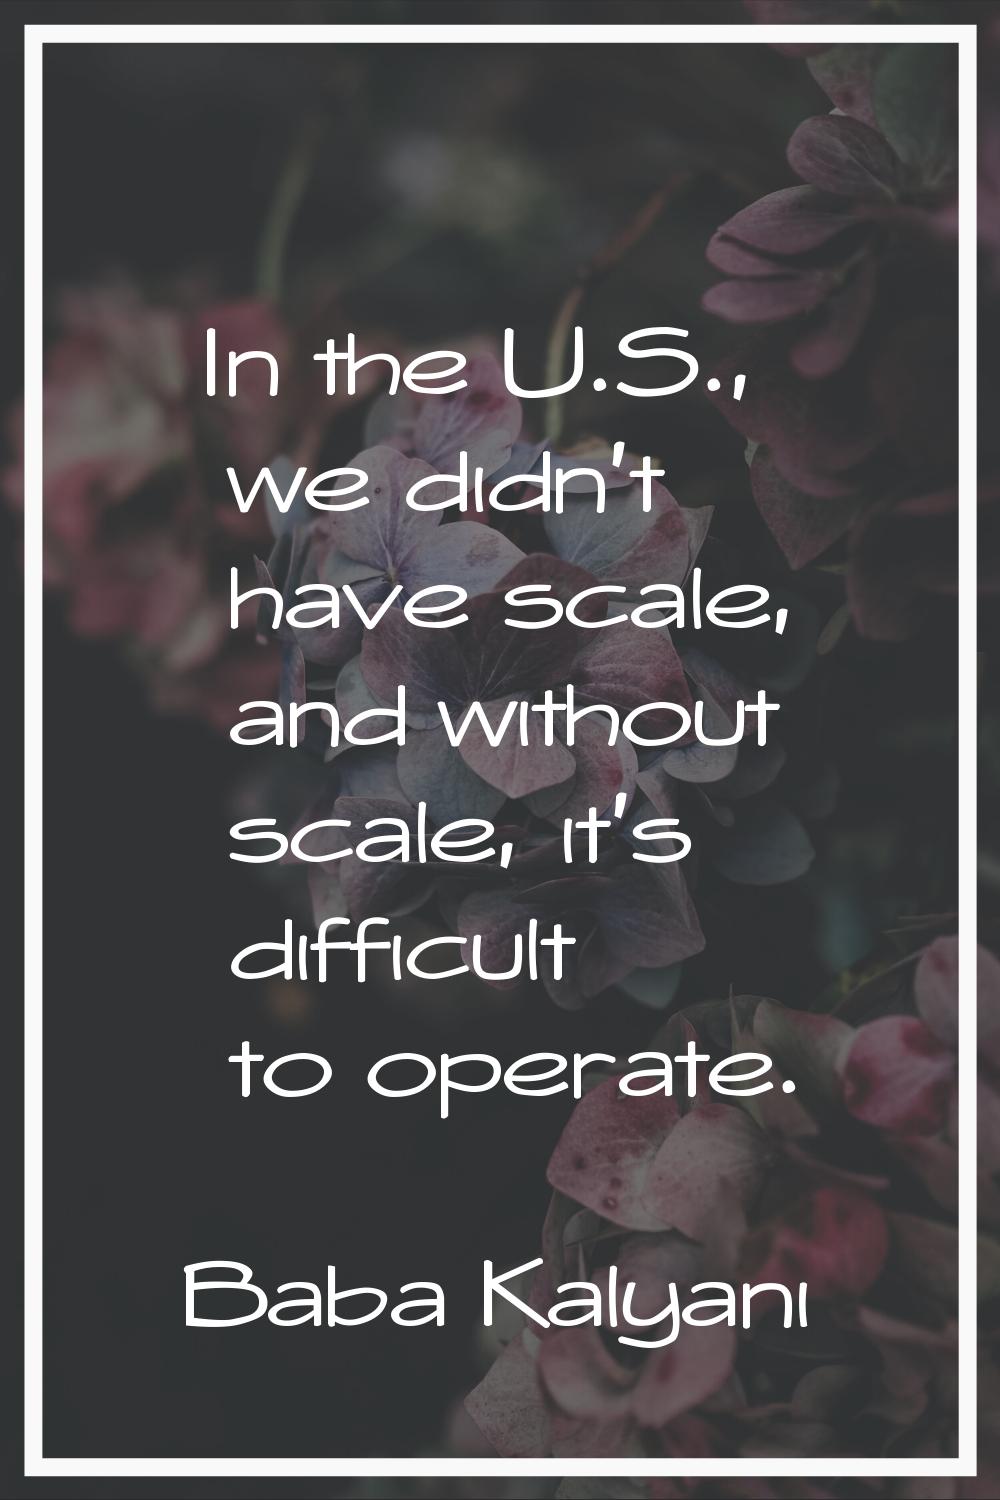 In the U.S., we didn't have scale, and without scale, it's difficult to operate.